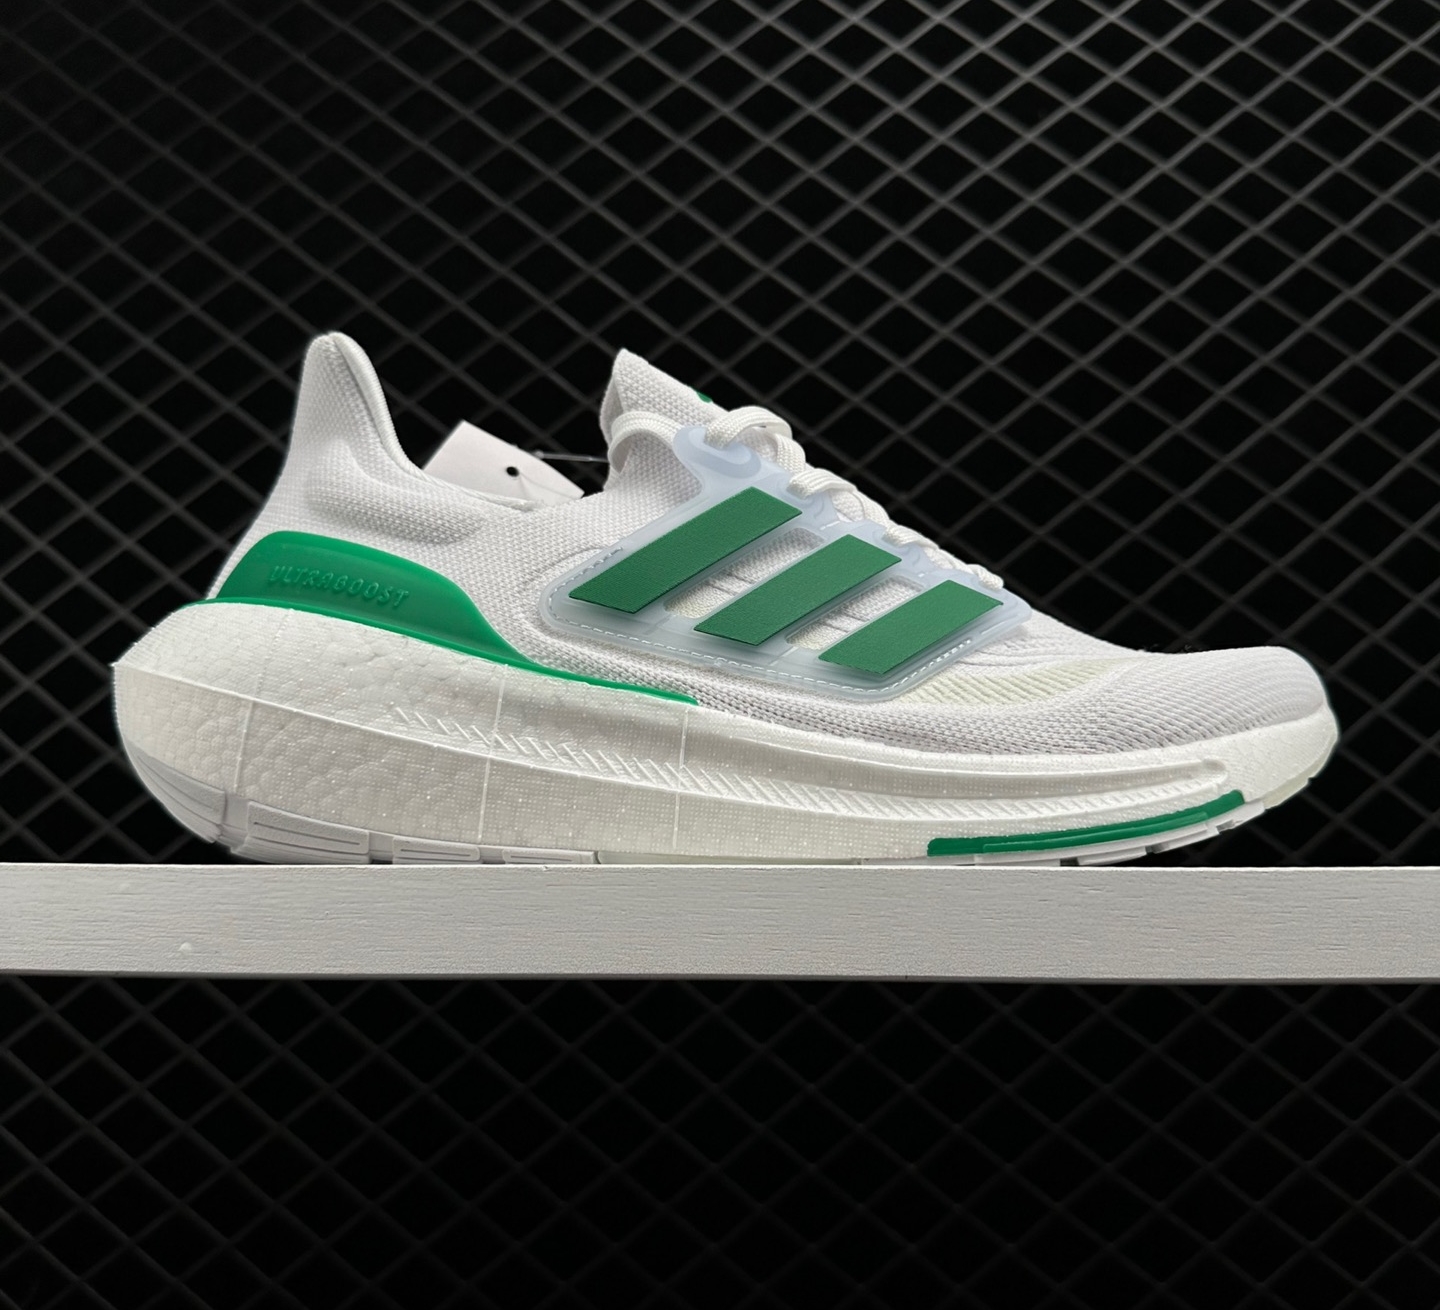 Adidas UltraBoost Light 'White Tint Court Green' - HQ6350 | Limited Edition and Ultimate Comfort